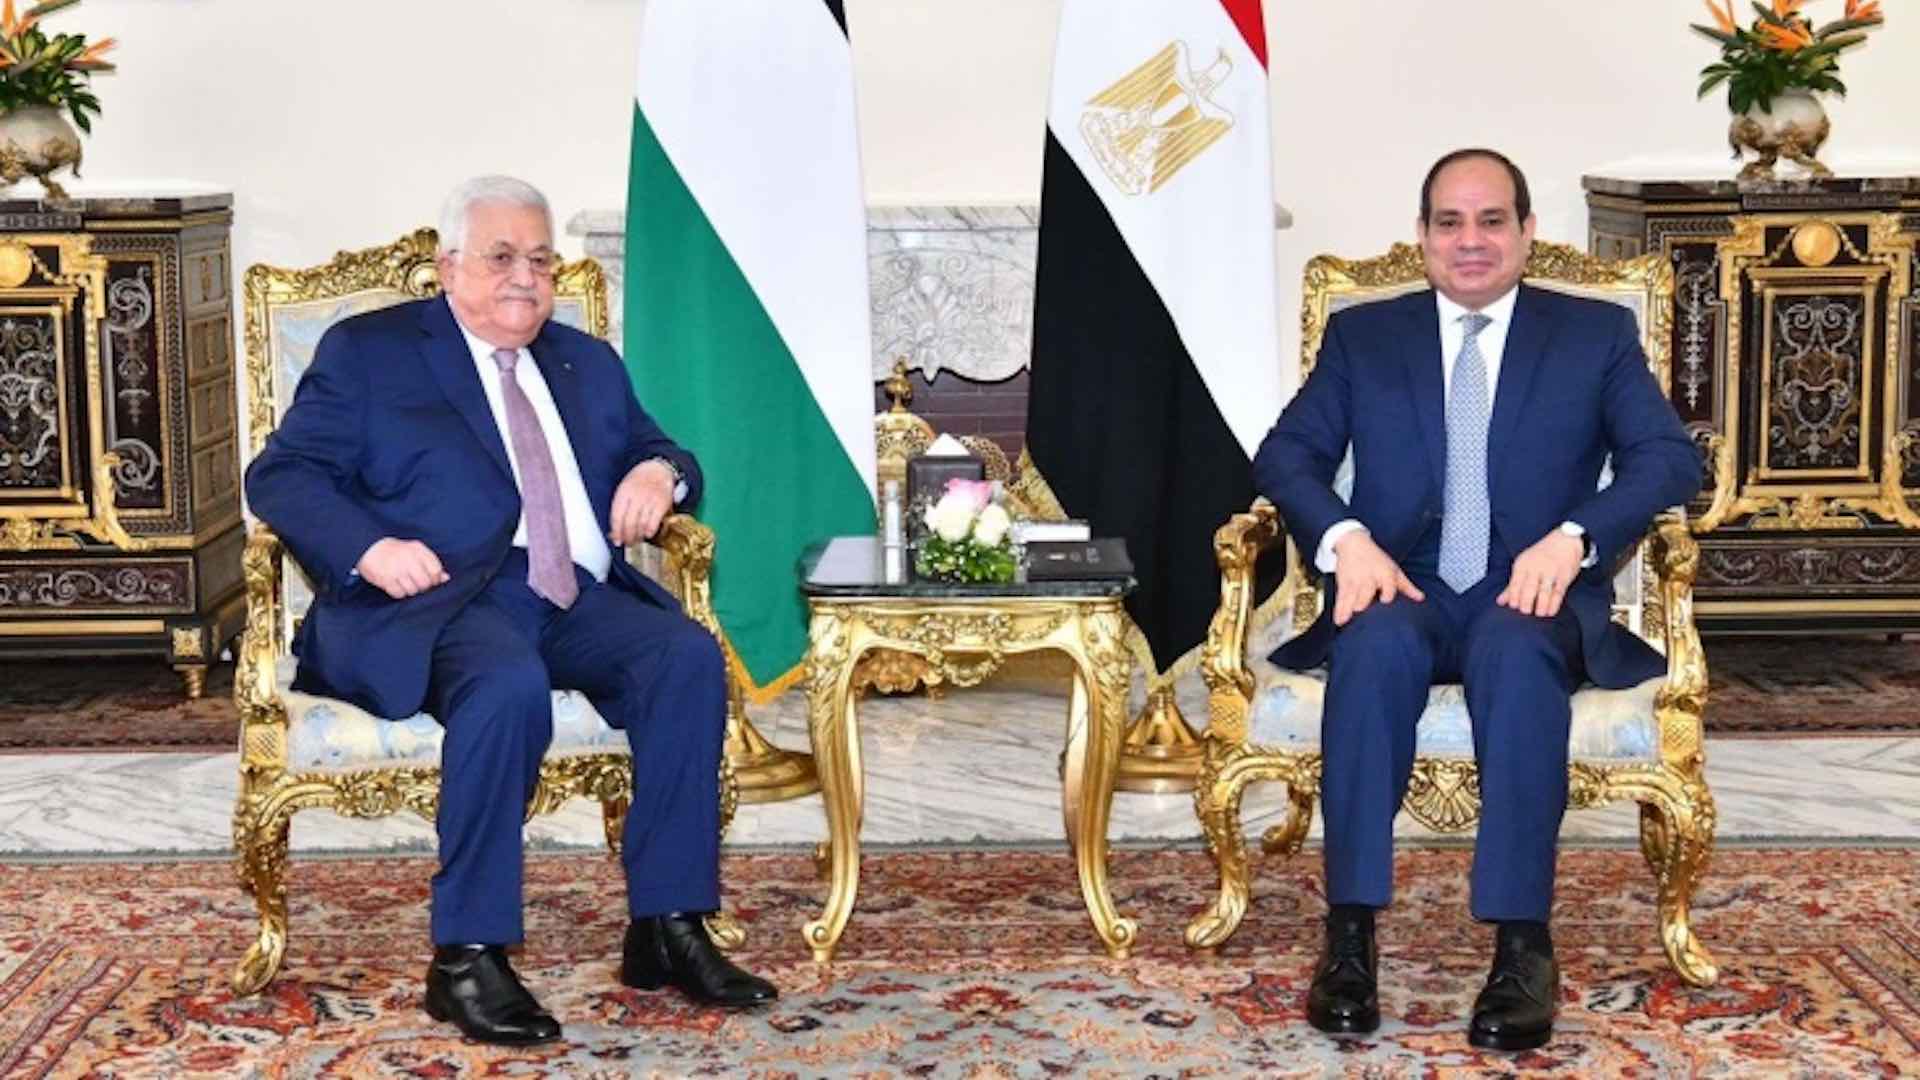 Egypt and Palestine's Presidents converge to discuss peace